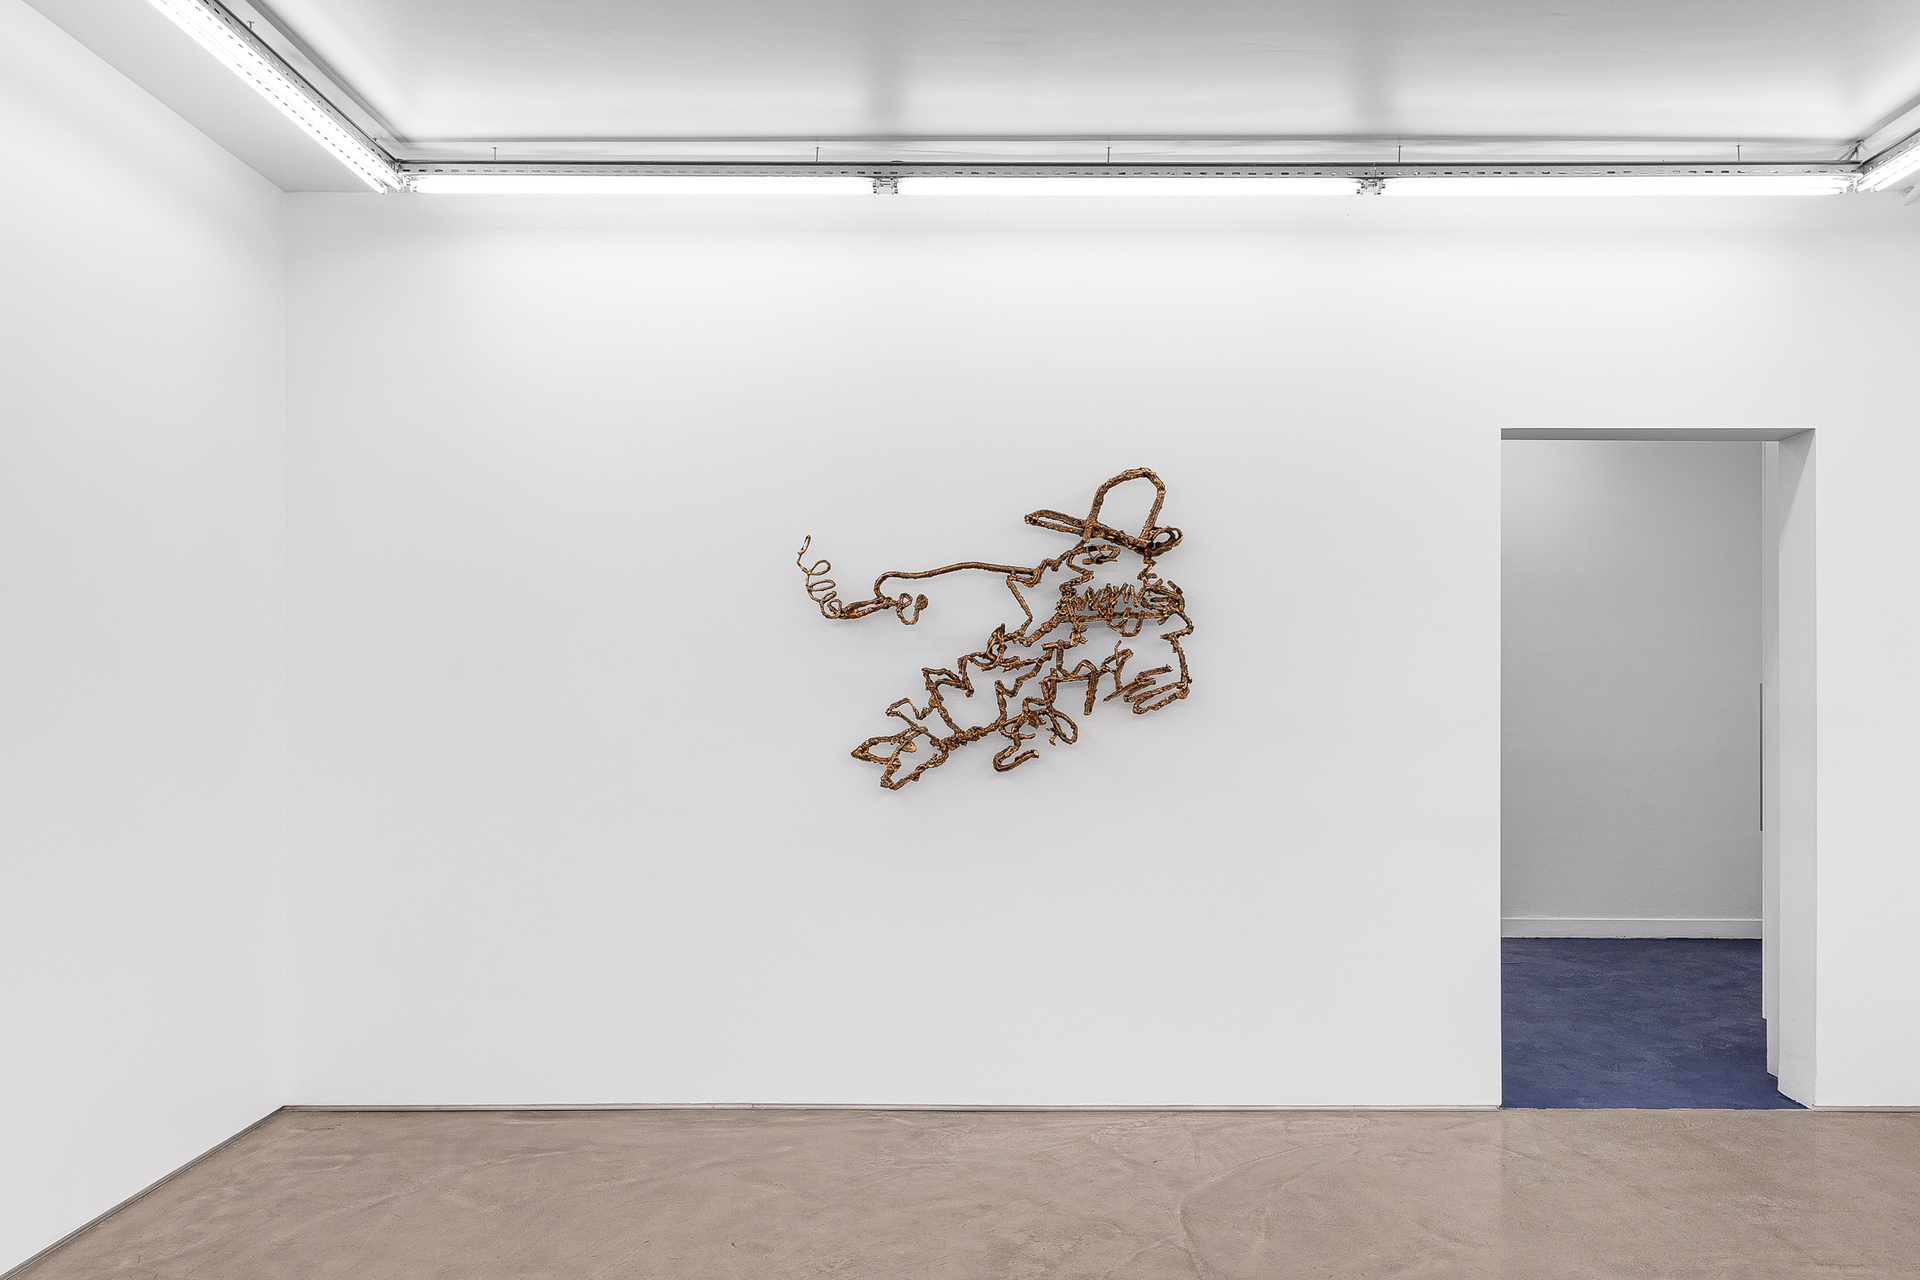 Exhibition view "Nobody Move" by Simone Zaccagnini at Galerie Derouillon, Paris, September 2021